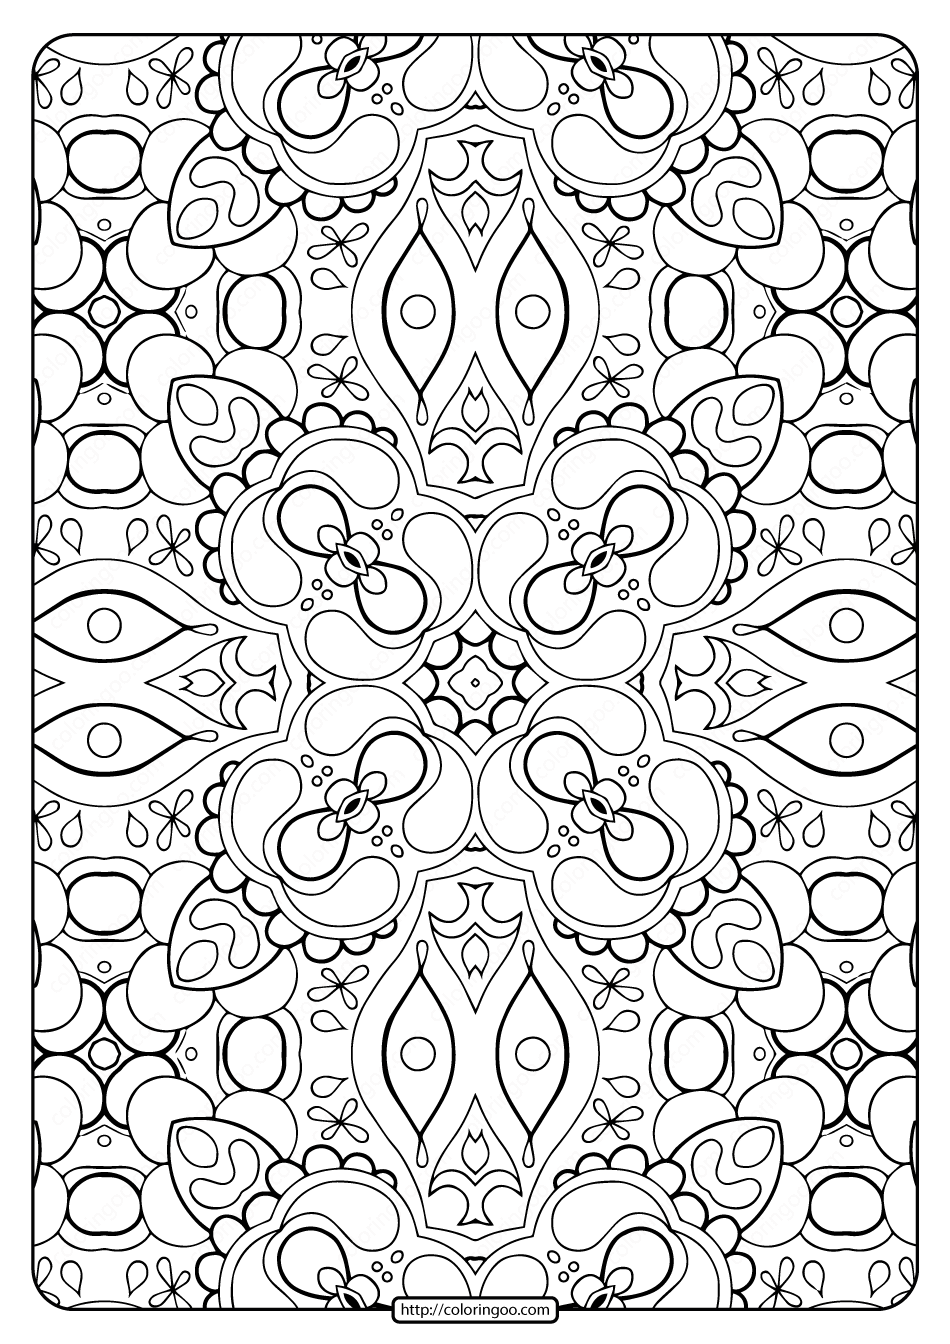 Download Printable Abstract Pattern Adult Coloring Pages-01